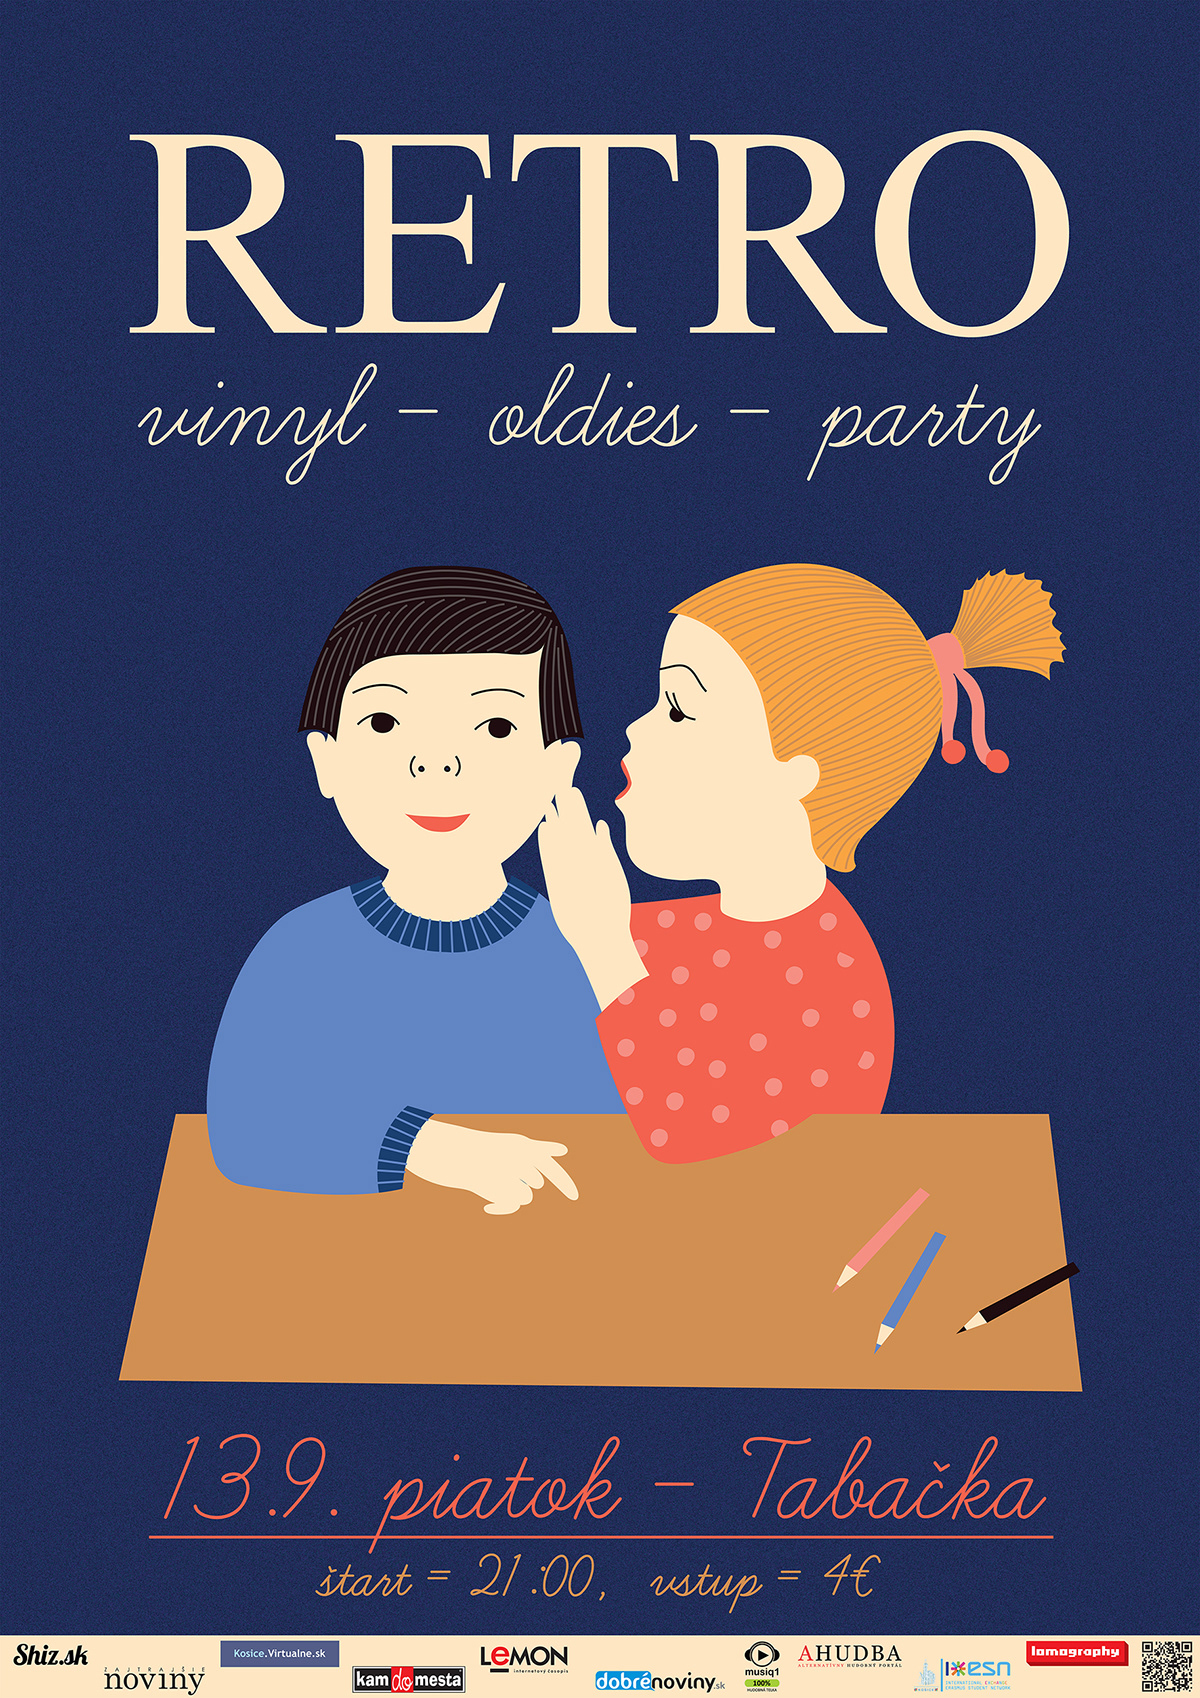 Retro-party posters